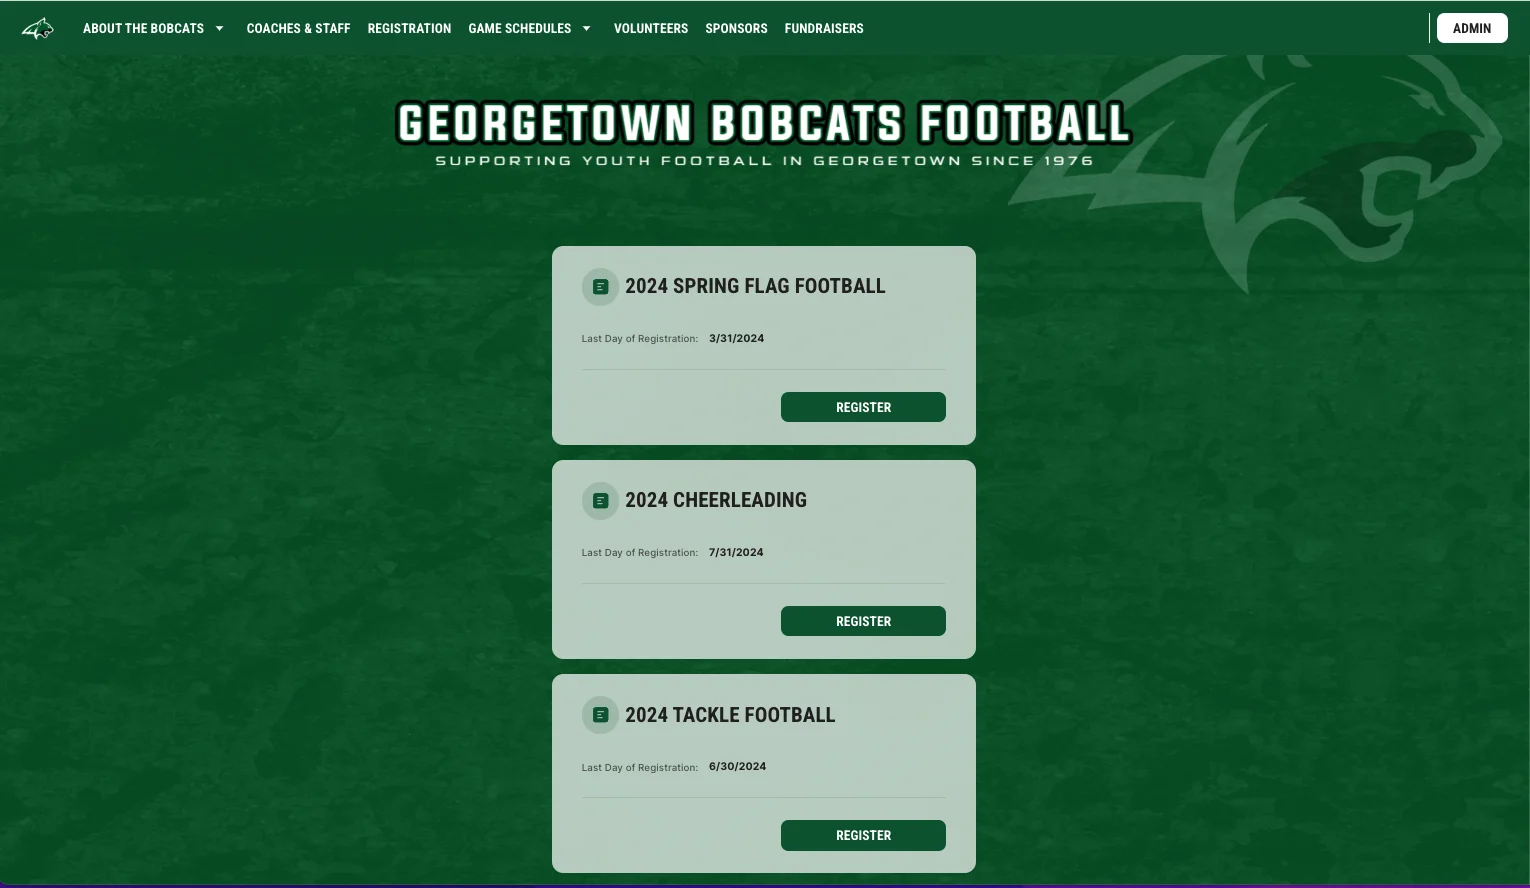 online registration for a youth football and cheerleading organization